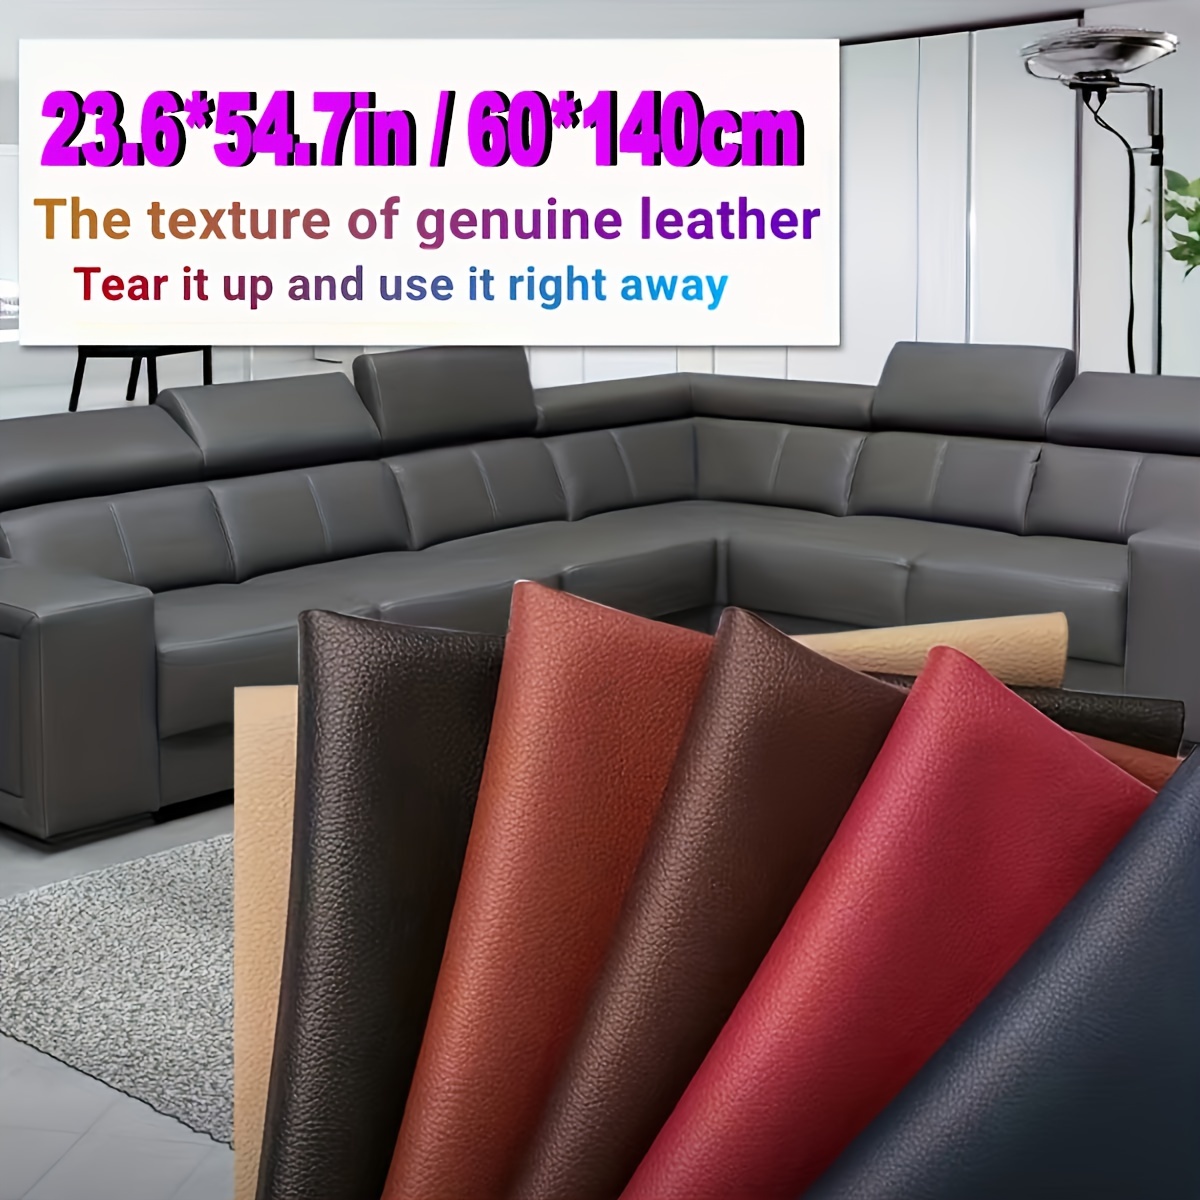 

1pc High Quality 61*139cm Faux Leather Repair Patch Self-adhesive Sofa Car Seat Repairing Faux Leather Fabric Upholstery Fabric Sticker Patch